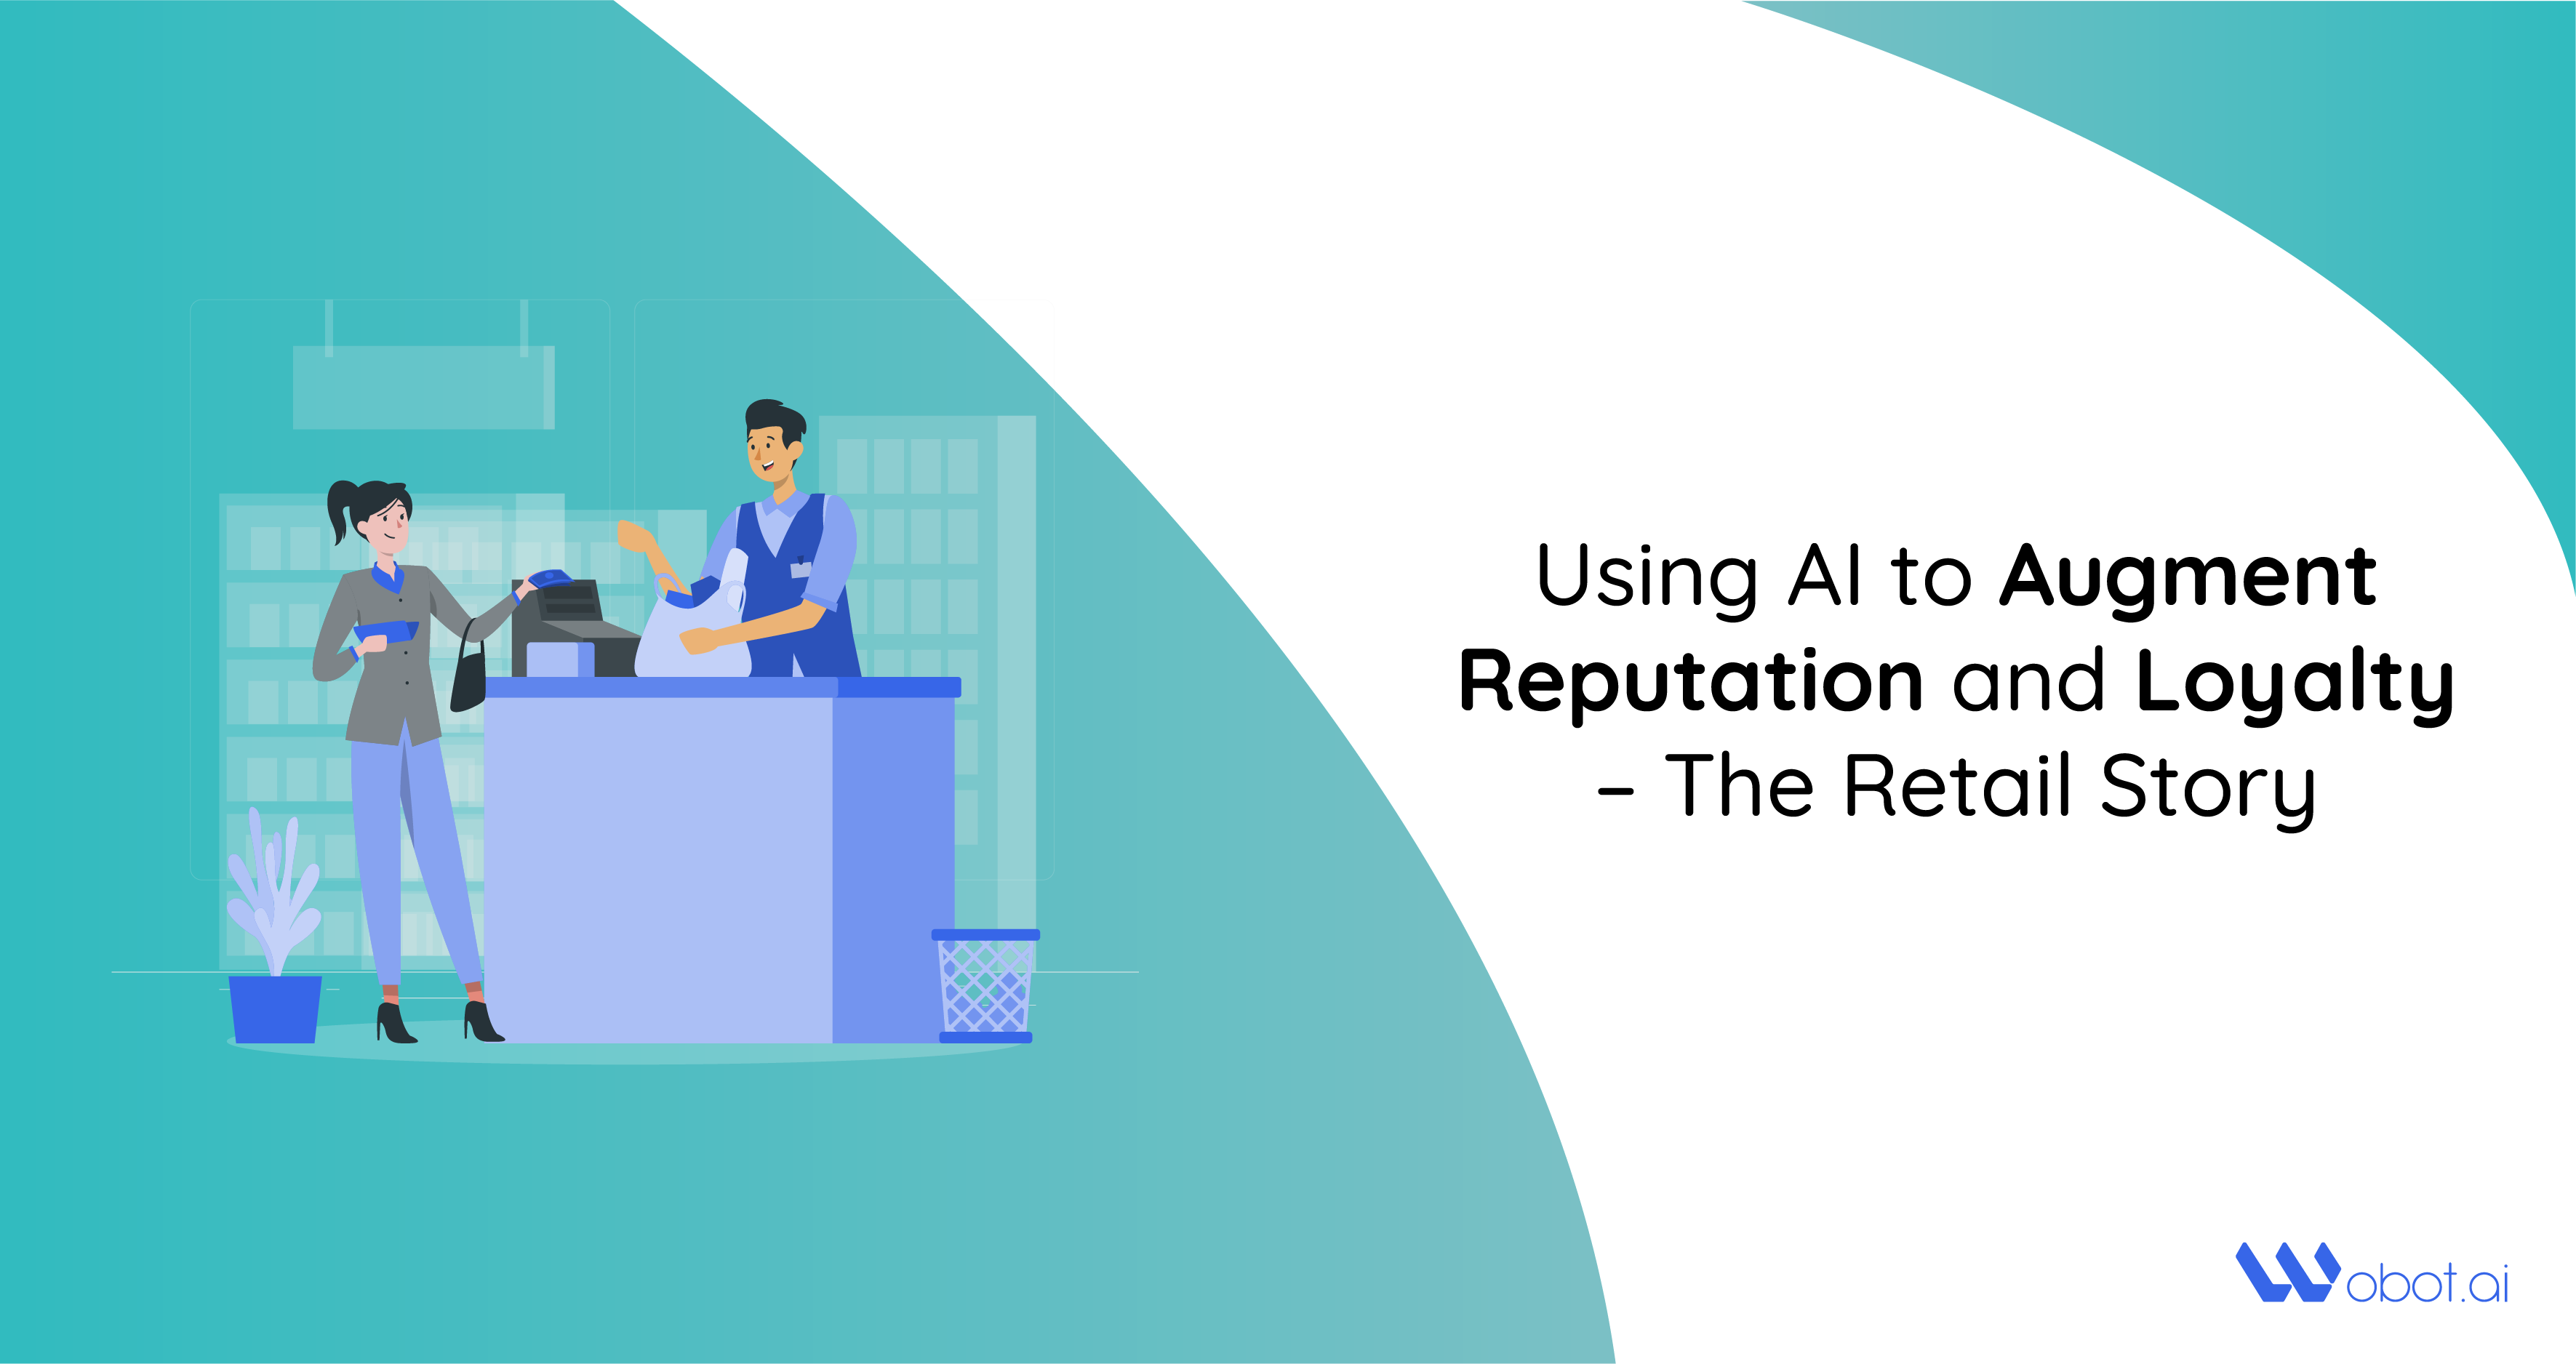 Using AI to Augment Reputation and Loyalty – The Retail Story